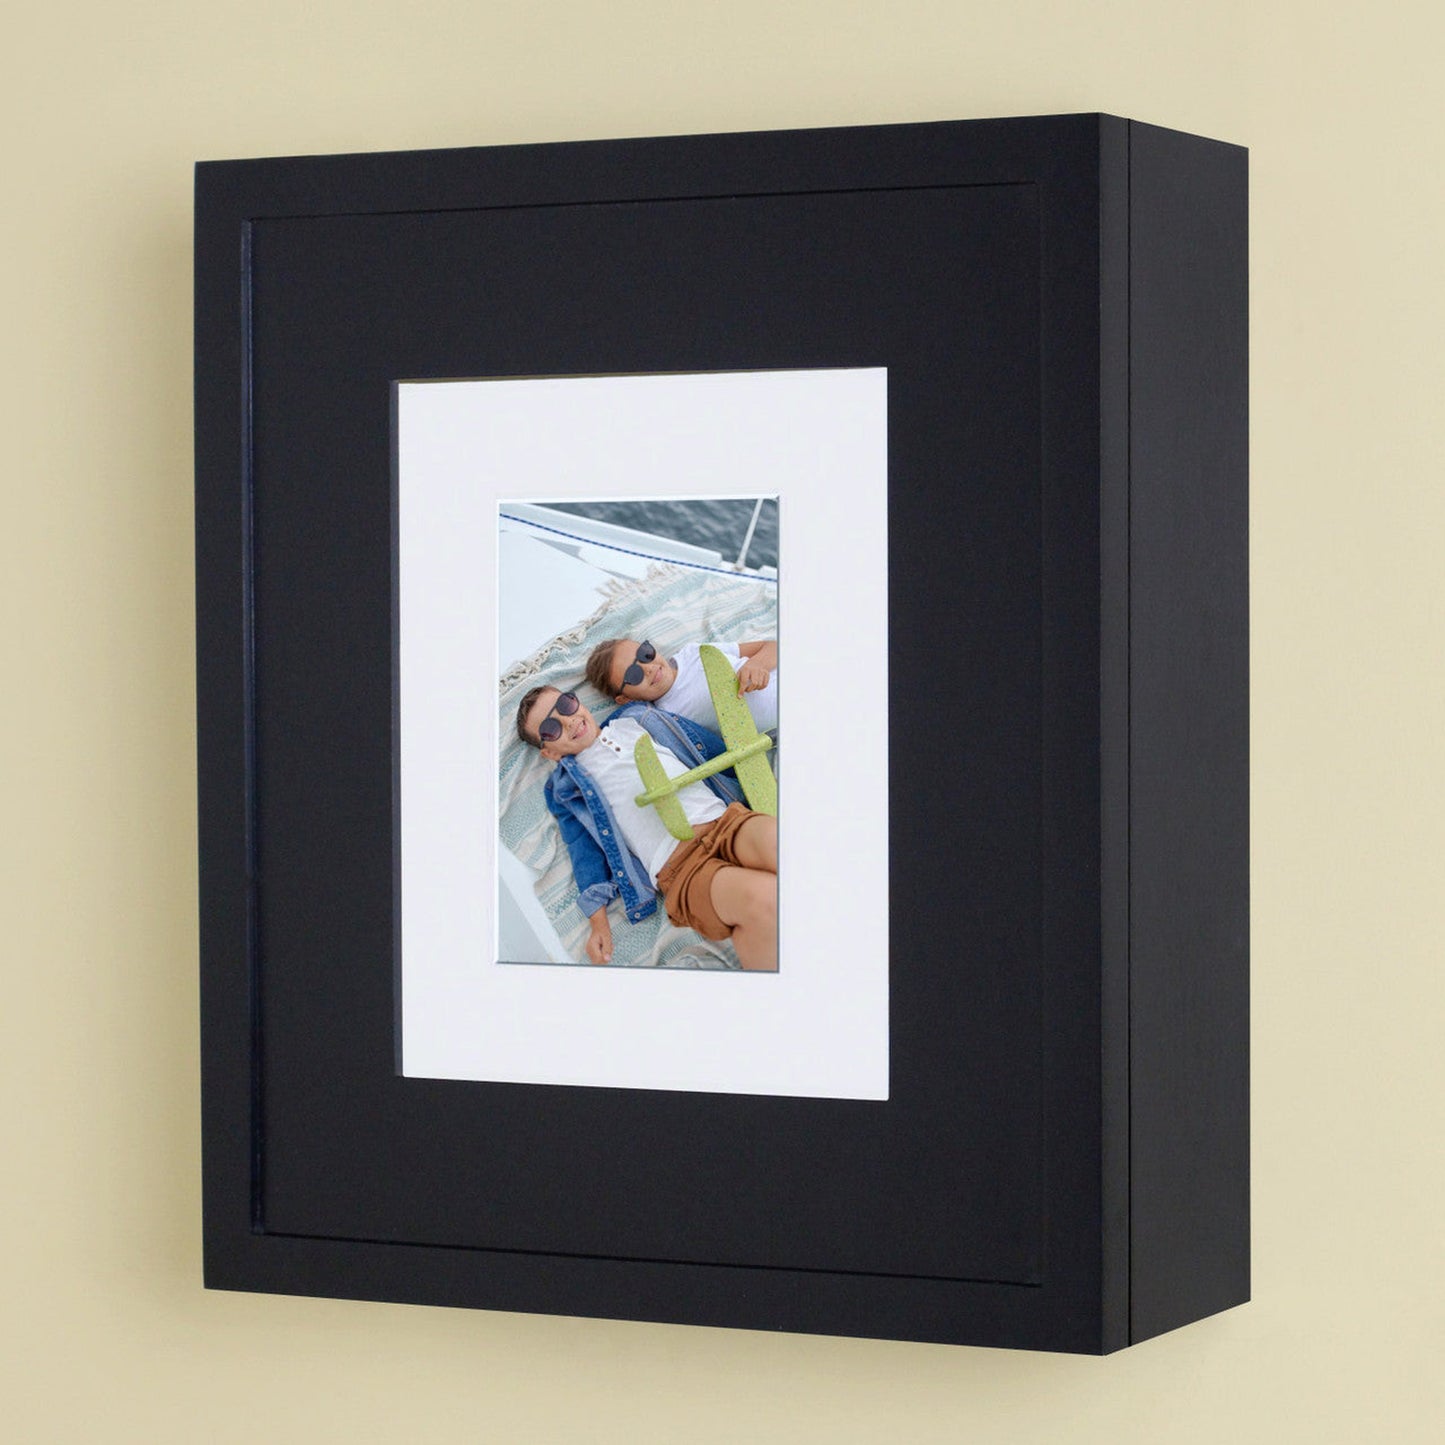 Fox Hollow Furnishings 15" x 13" Black Compact Wall Mount Picture Frame Medicine Cabinet